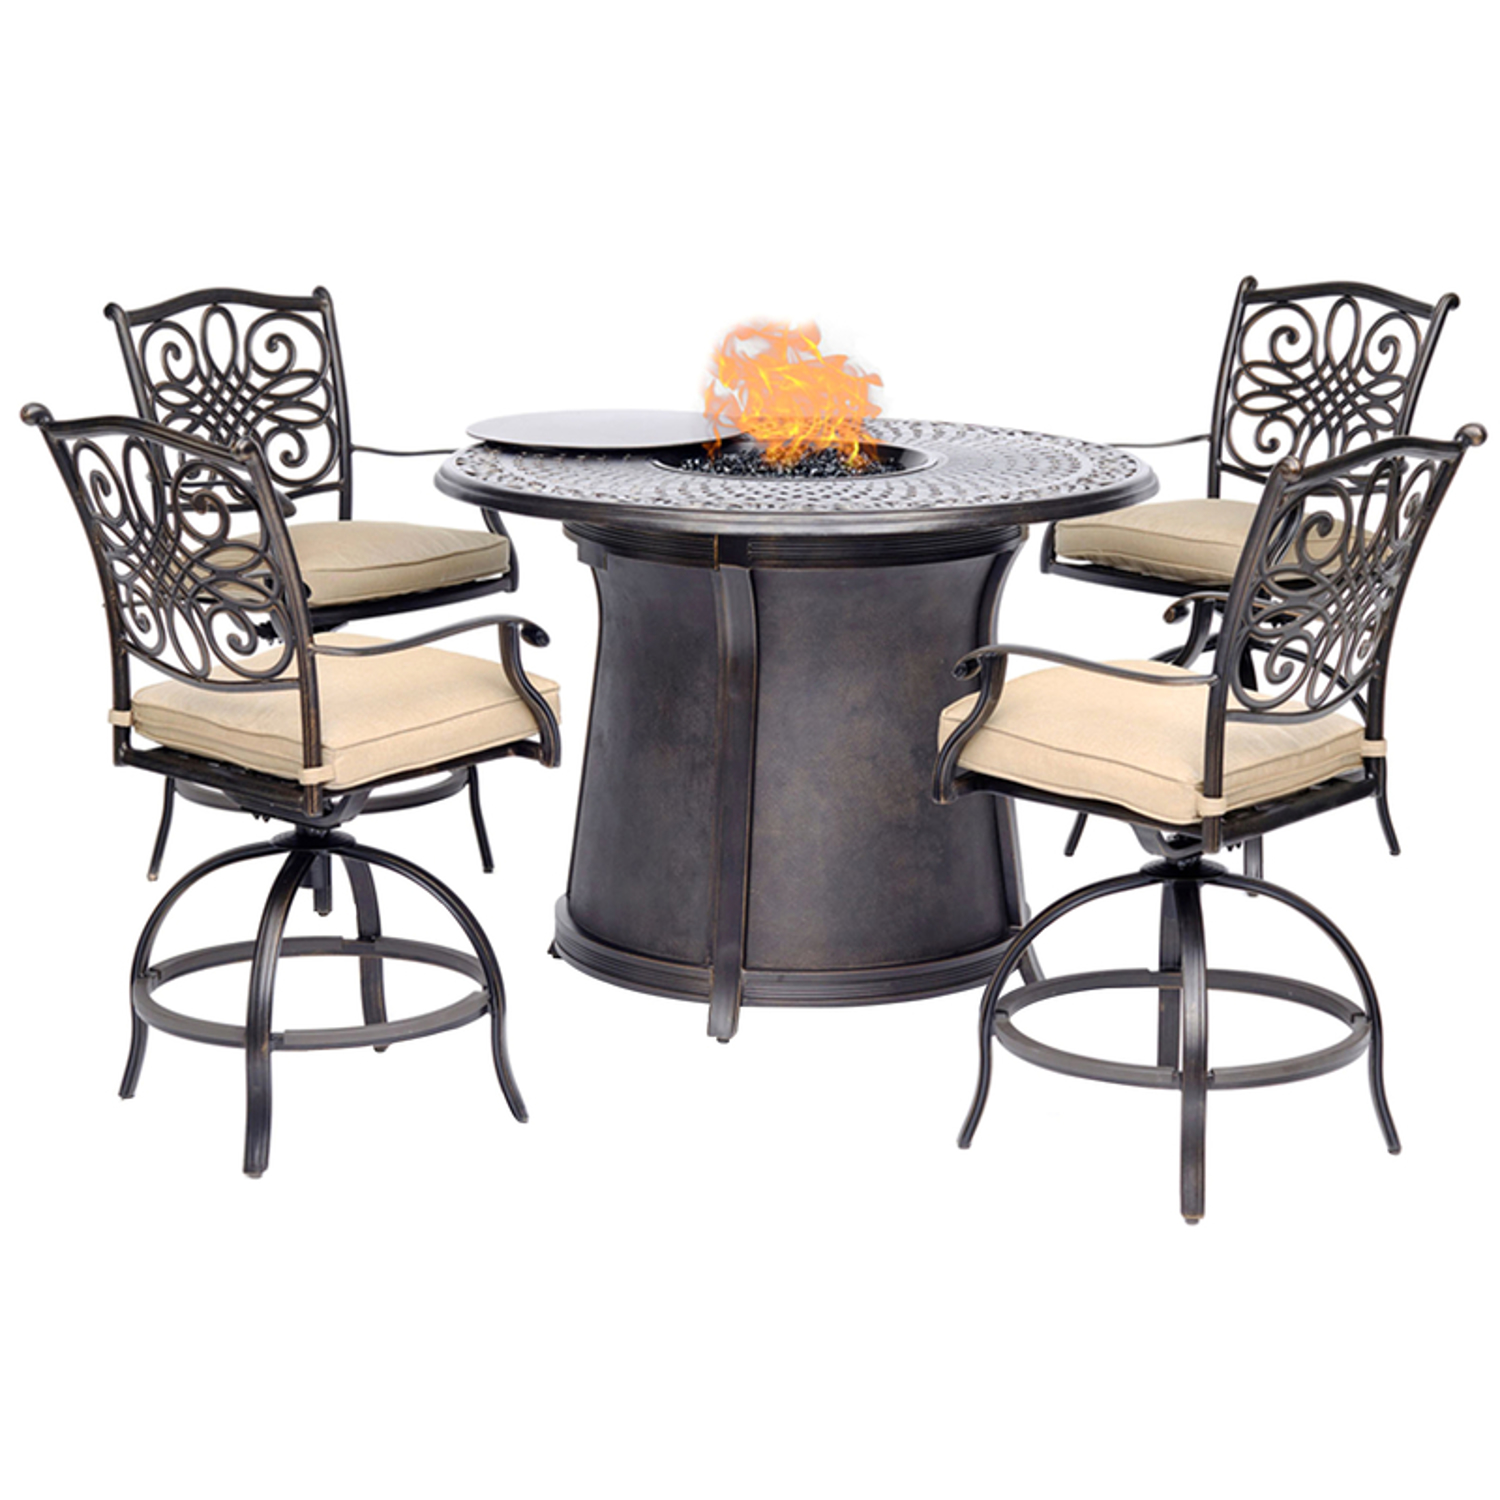 Photos - Garden Furniture Hanover Traditions 5 pc Bronze Aluminum Traditional High Dining Fire Pit S 